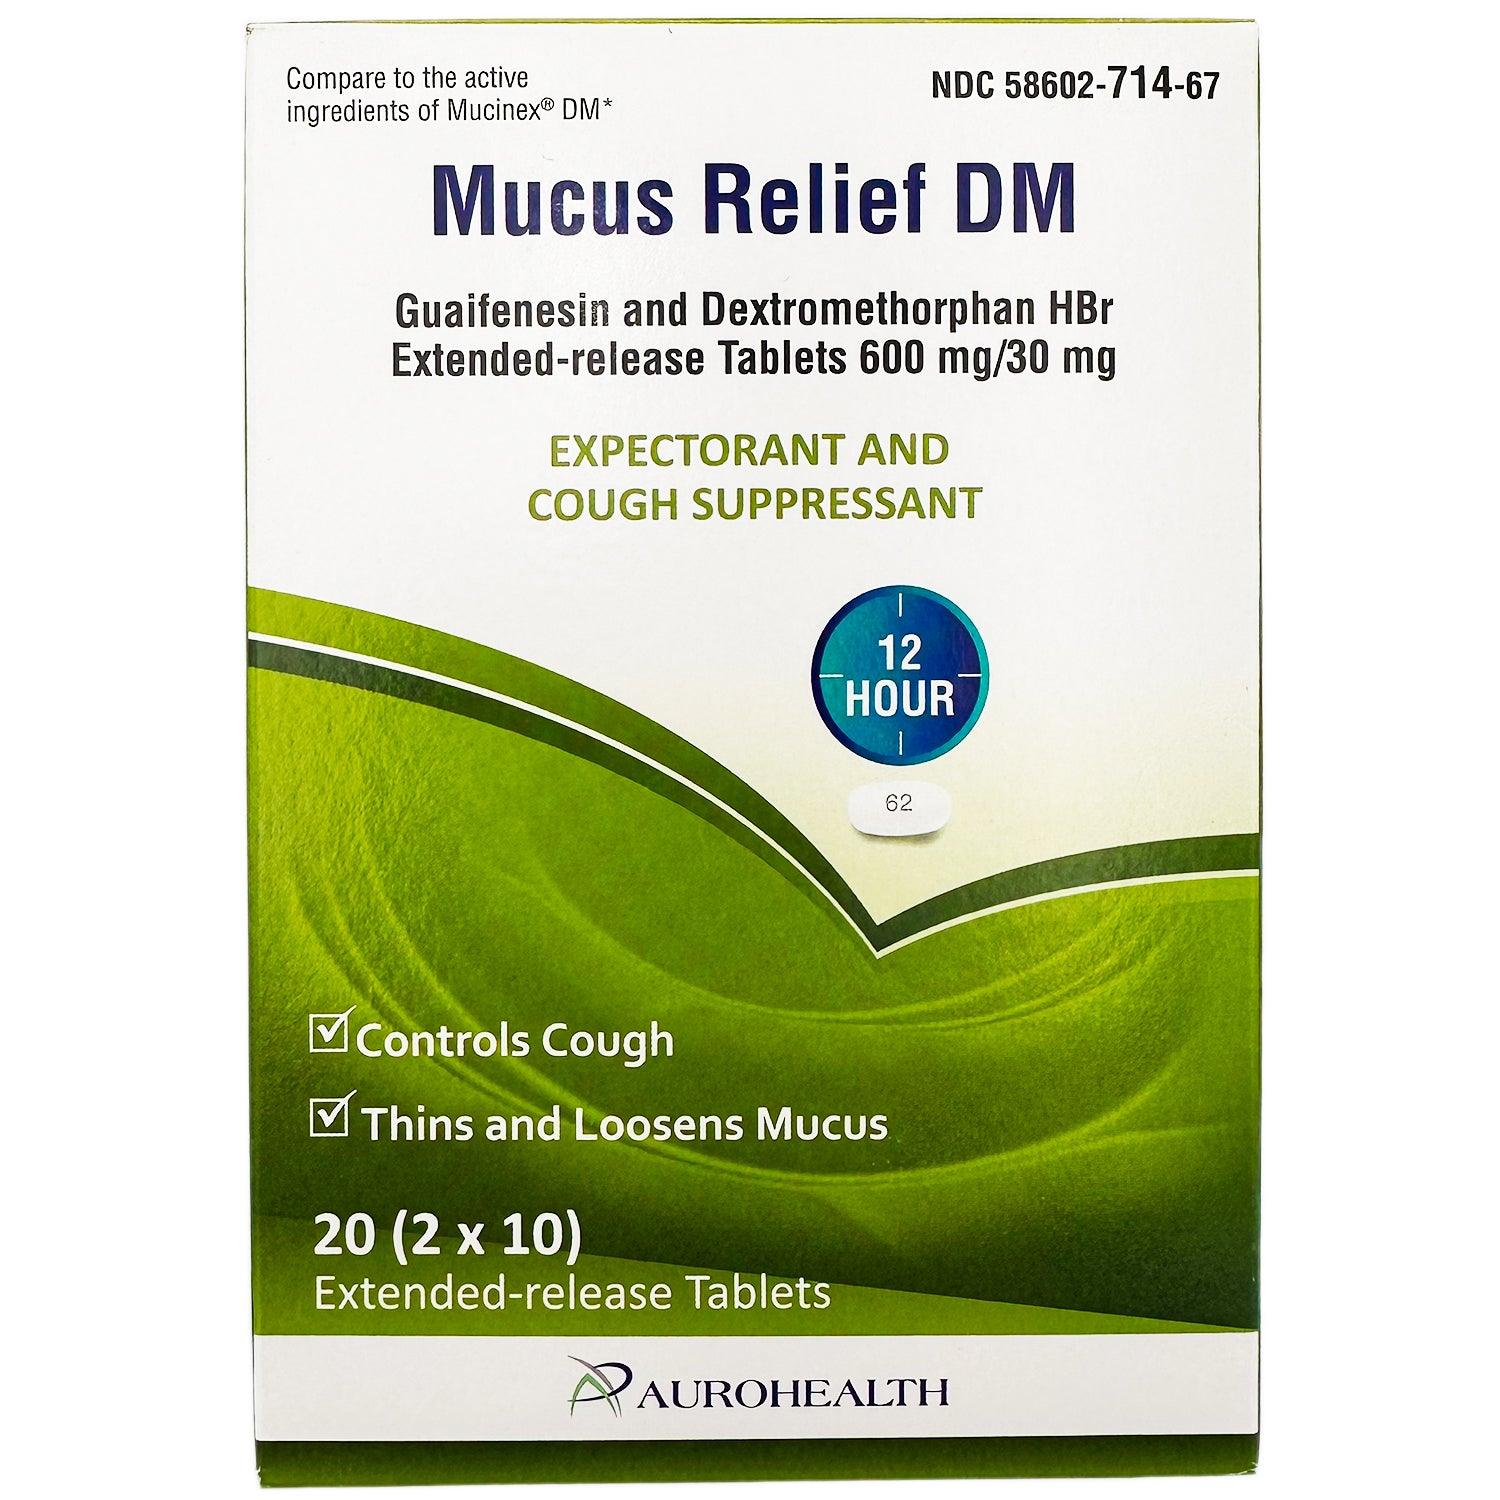 aurohealth | mucus relief DM expectorant & cough | 20 ct | BEST BY 05/25 - Home Revival Shop